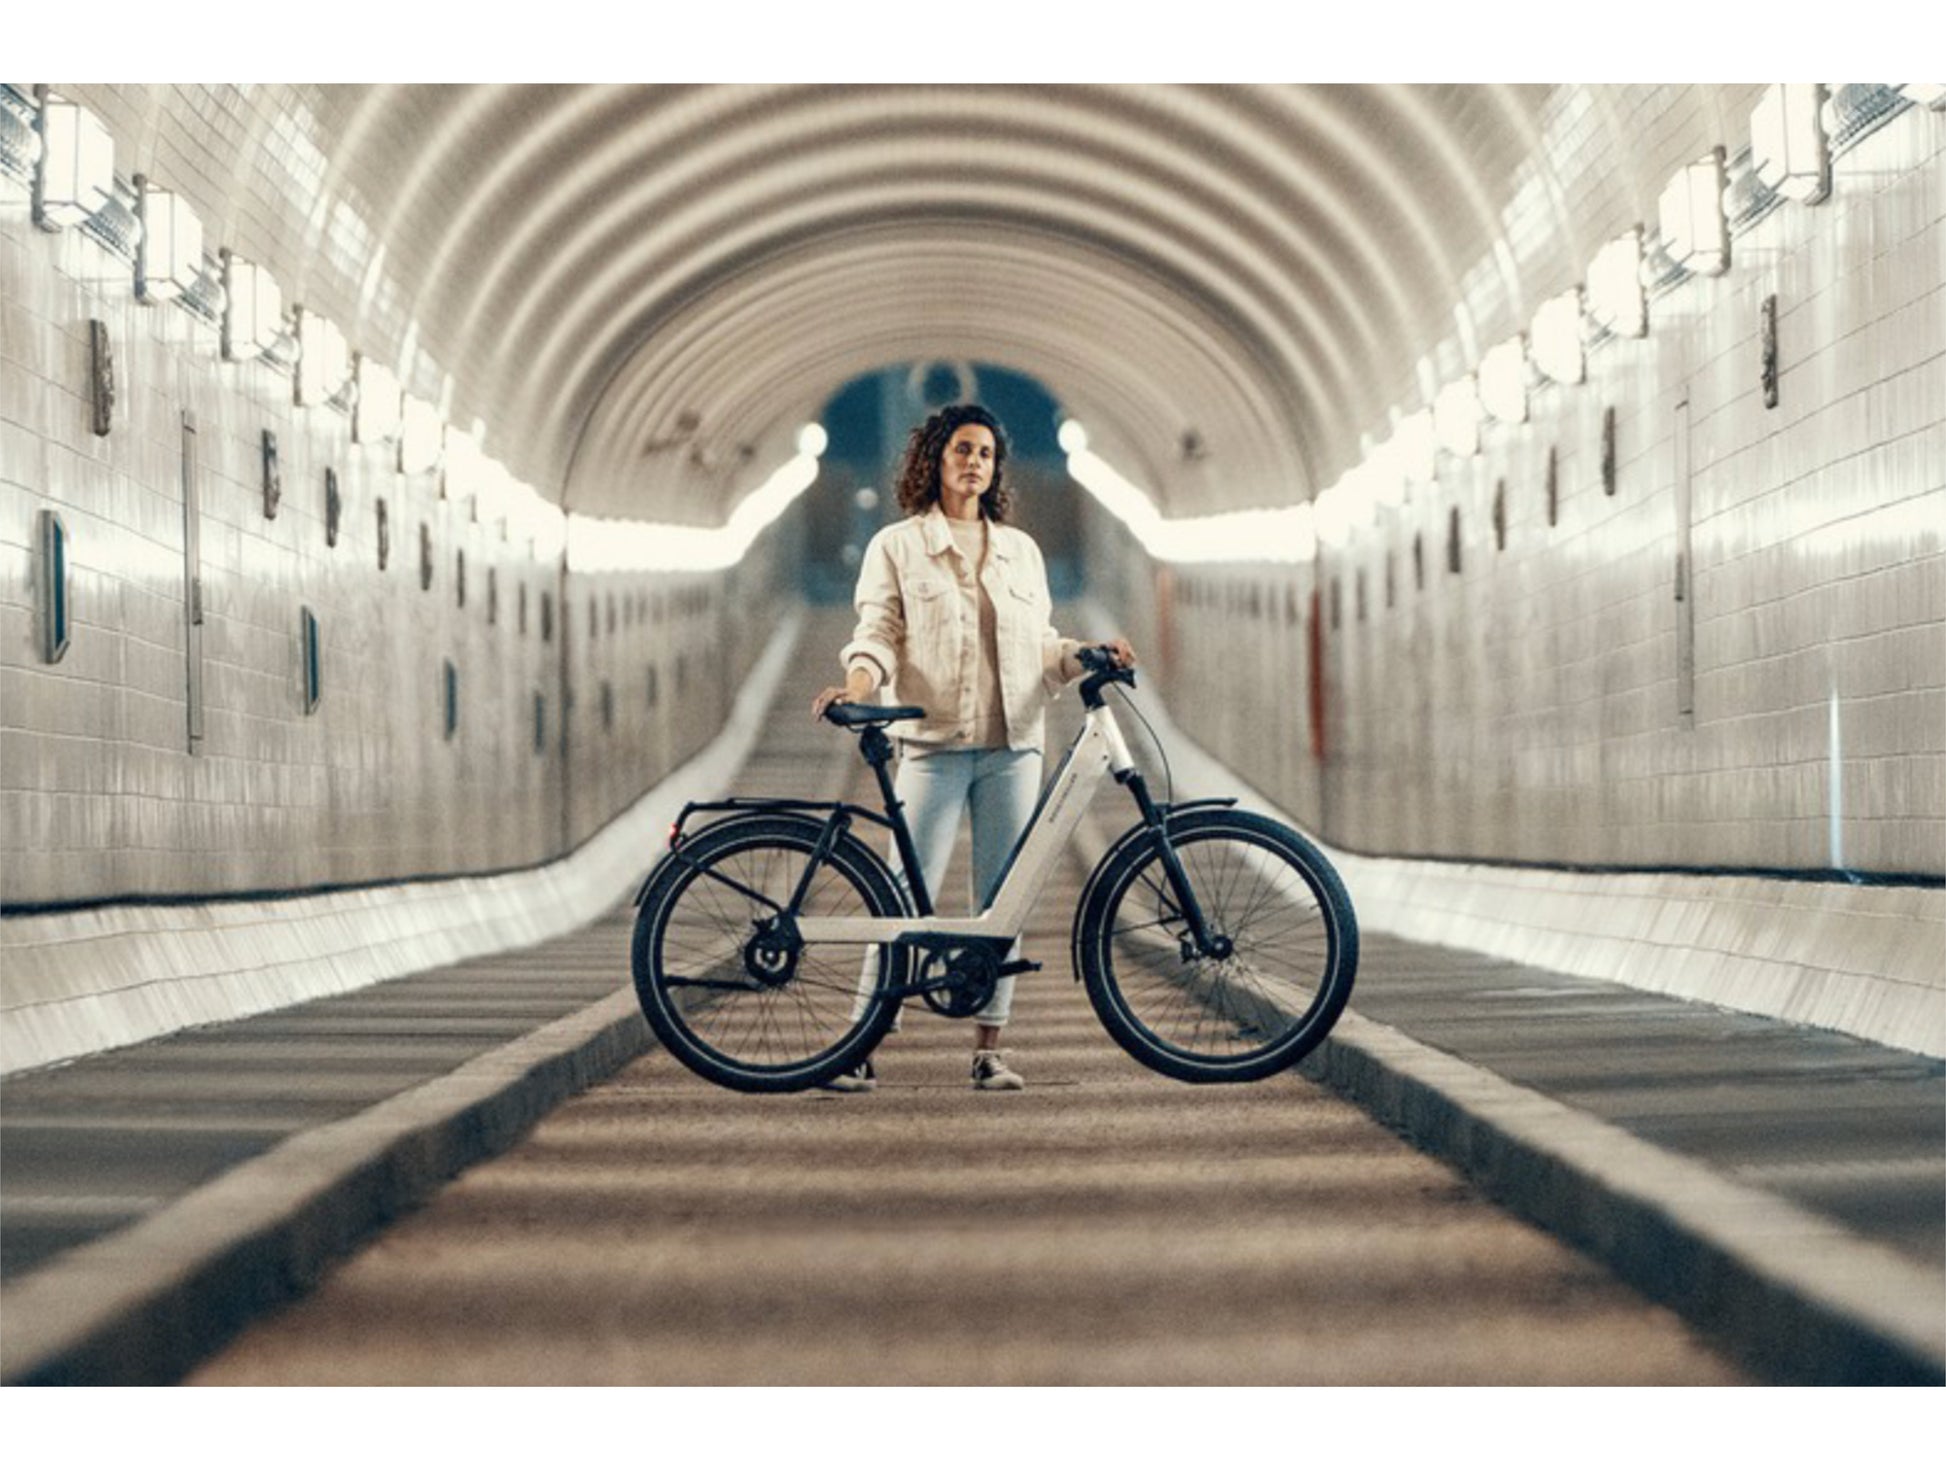 Riese and Muller Nevo GT Automatic emtb hardtail woman in city tunnel bike path